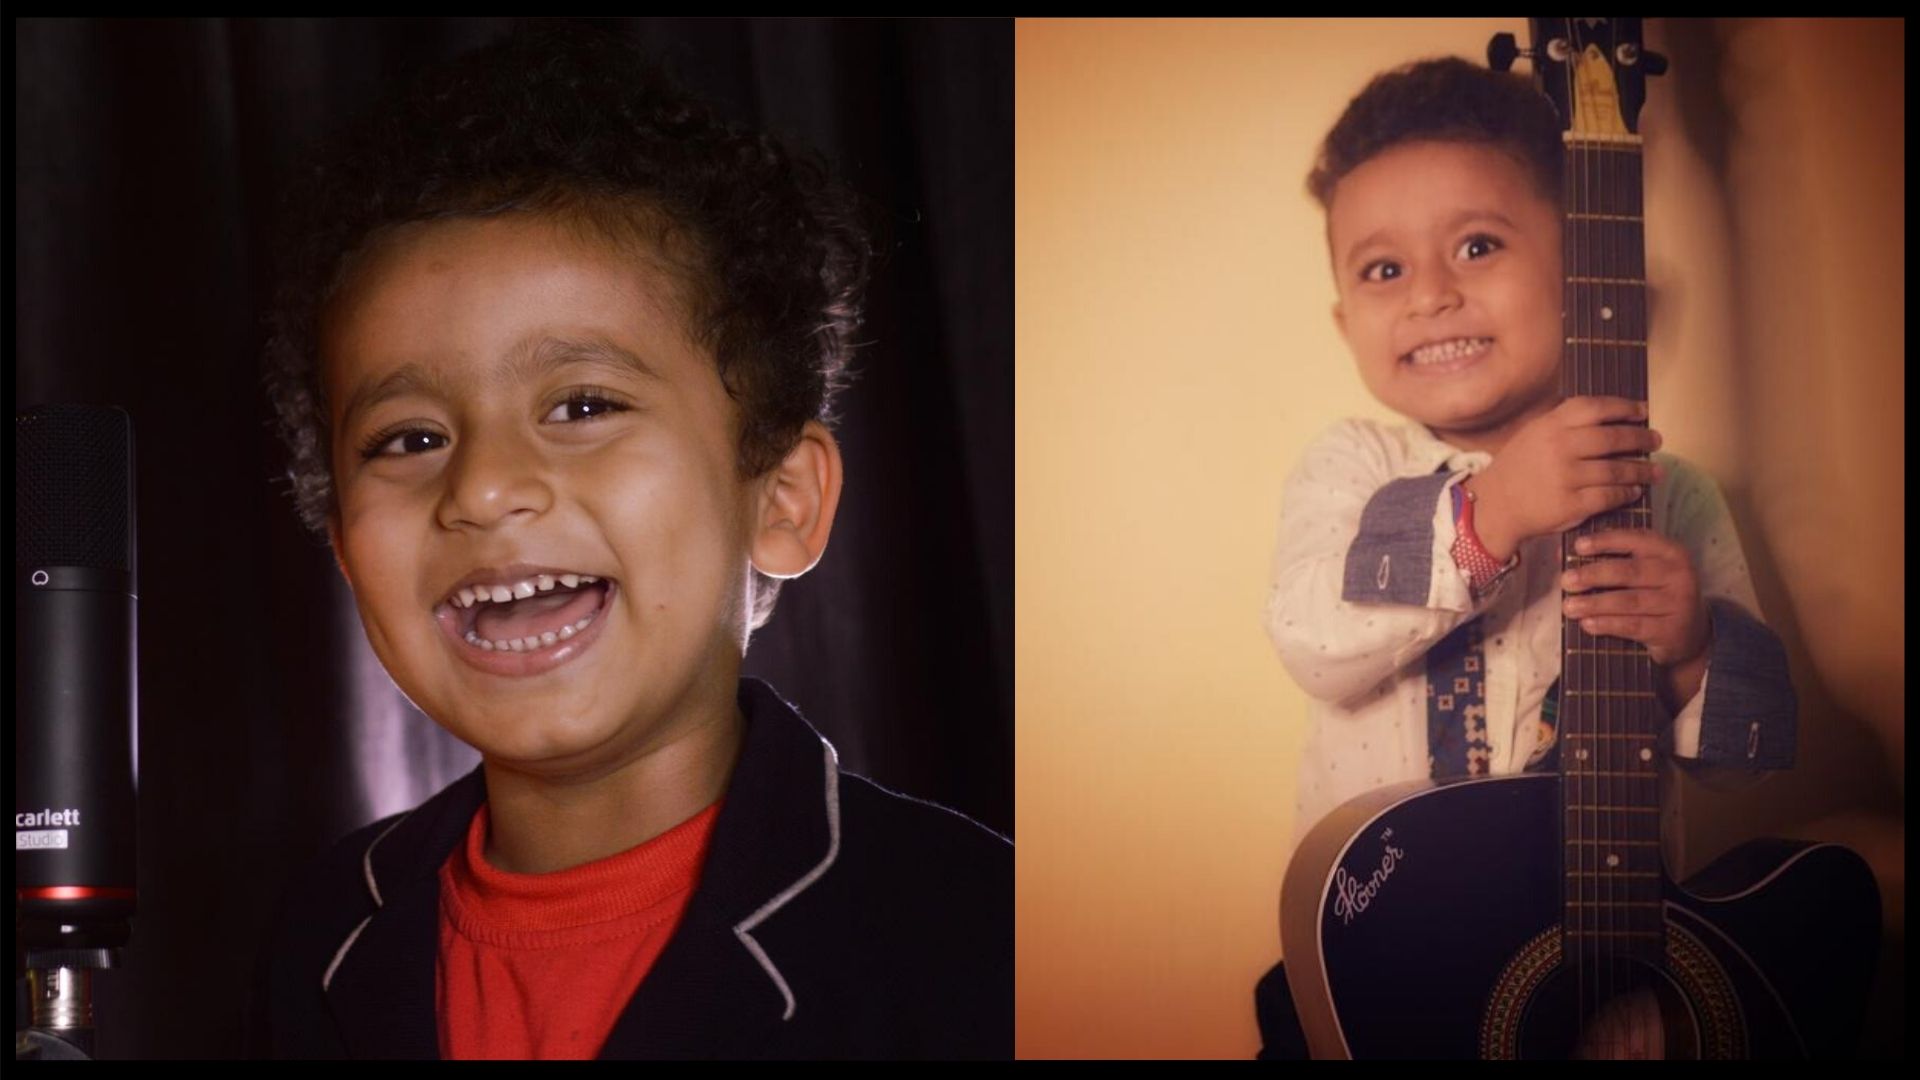 Cutest child who dreams to become a Rock Singer - Here is the story of a 3 yr old kid Dhritishman Chakraborty